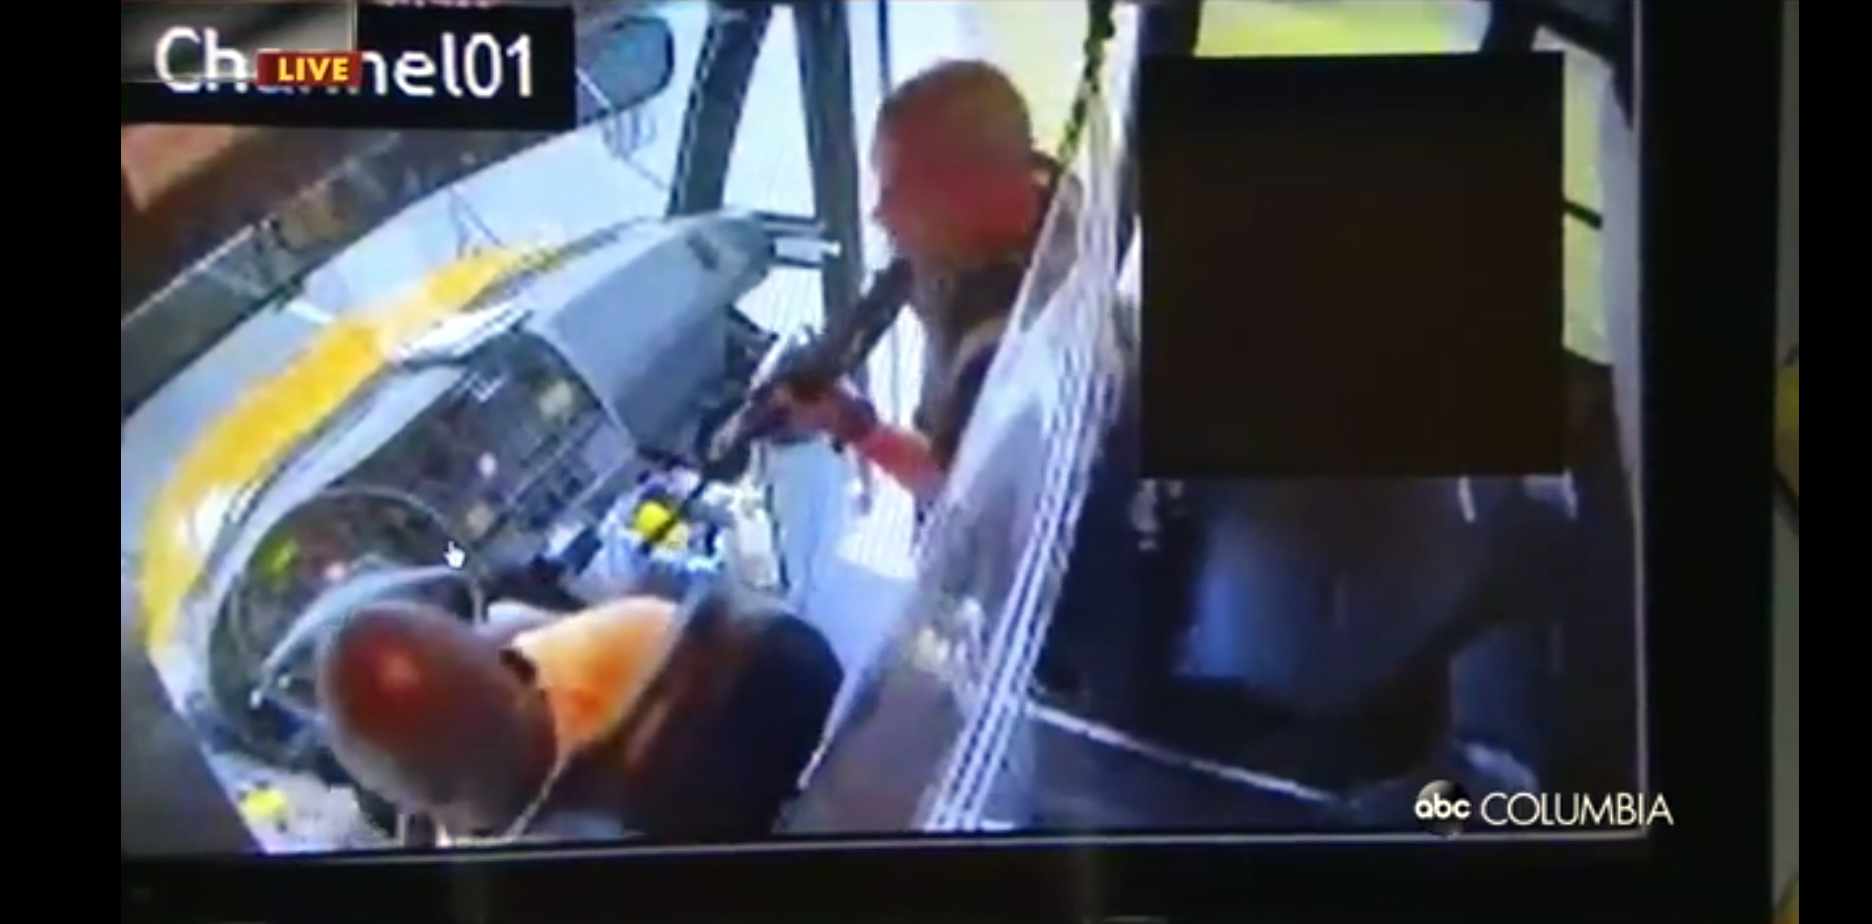 PHOTO: Surveillance video from inside the school bus shows the suspect appearing to point a rifle at the bus driver, in Richland County, S.C., May 6, 2021.